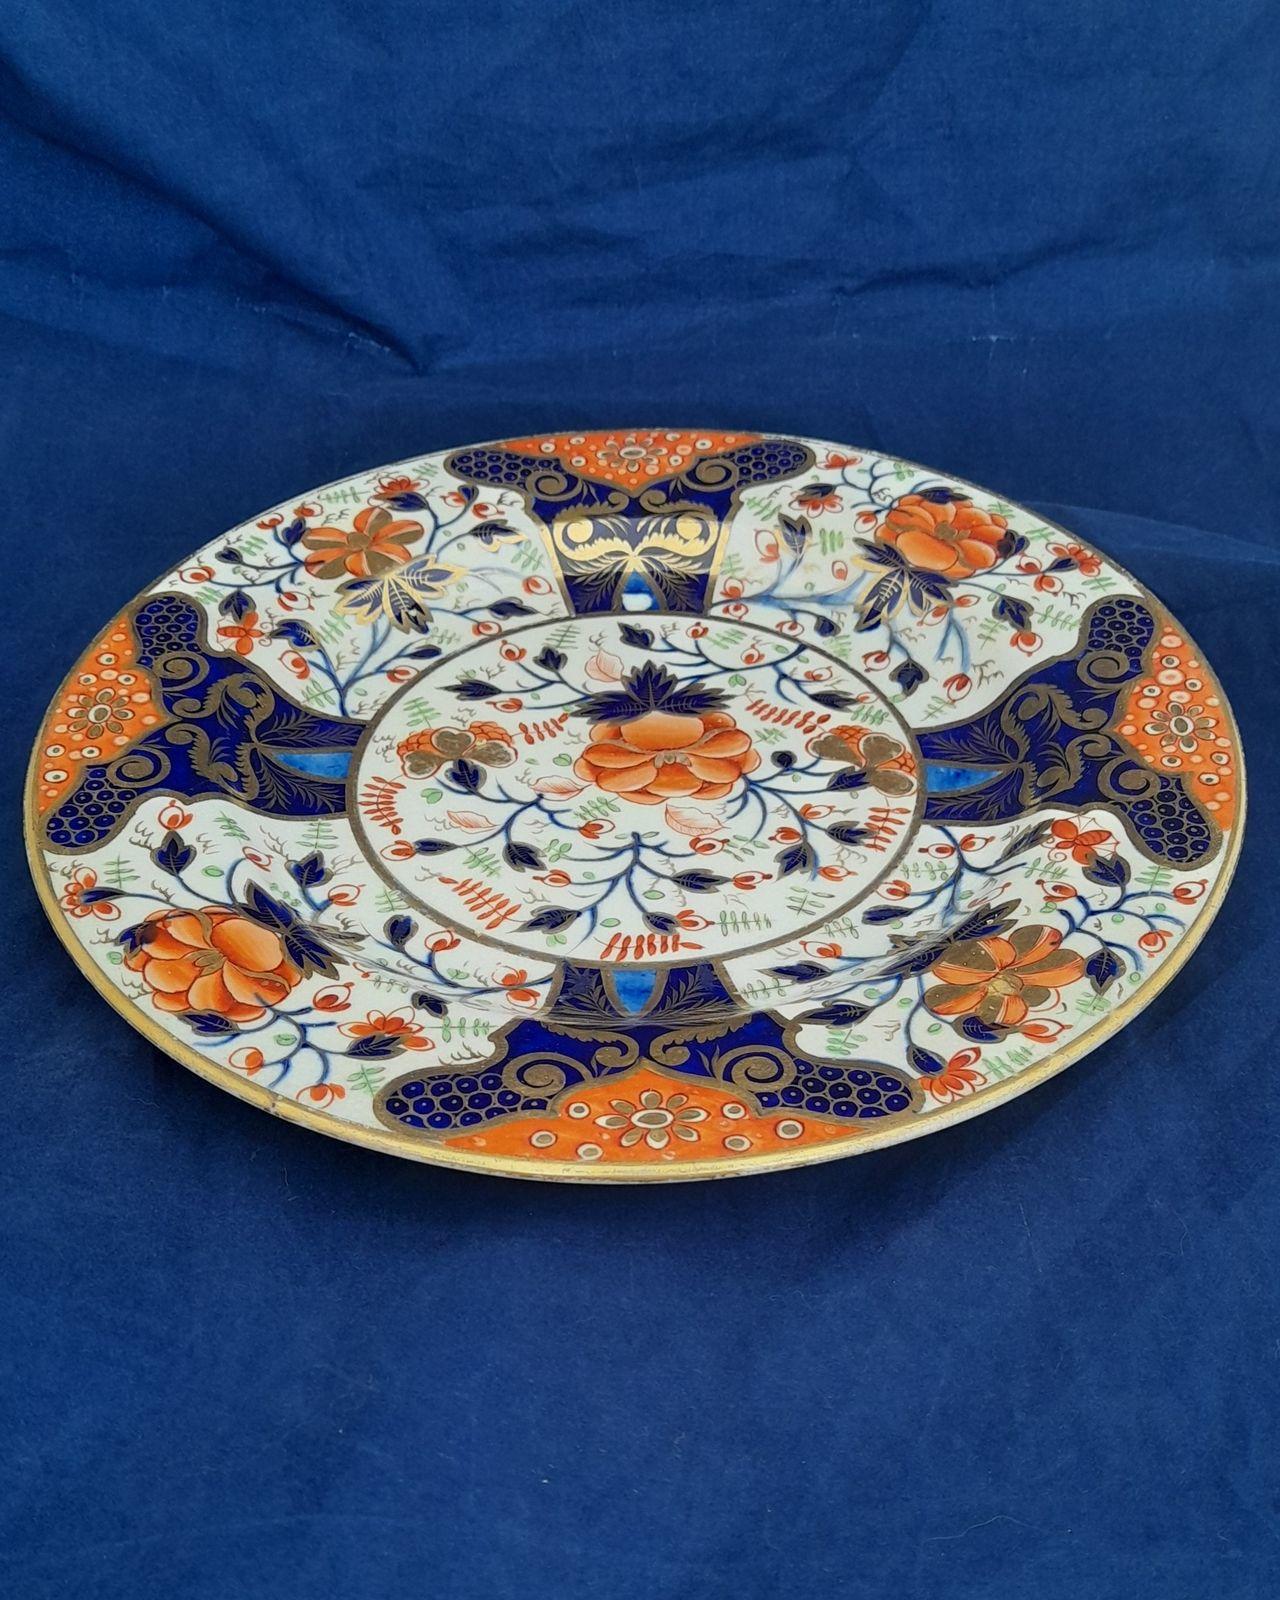 An antique Derby porcelain early 19th century Regency period Imari pattern ten inches diameter dinner plate, hand painted with bright and bold colours in an Imari pattern  dating from circa 1820.